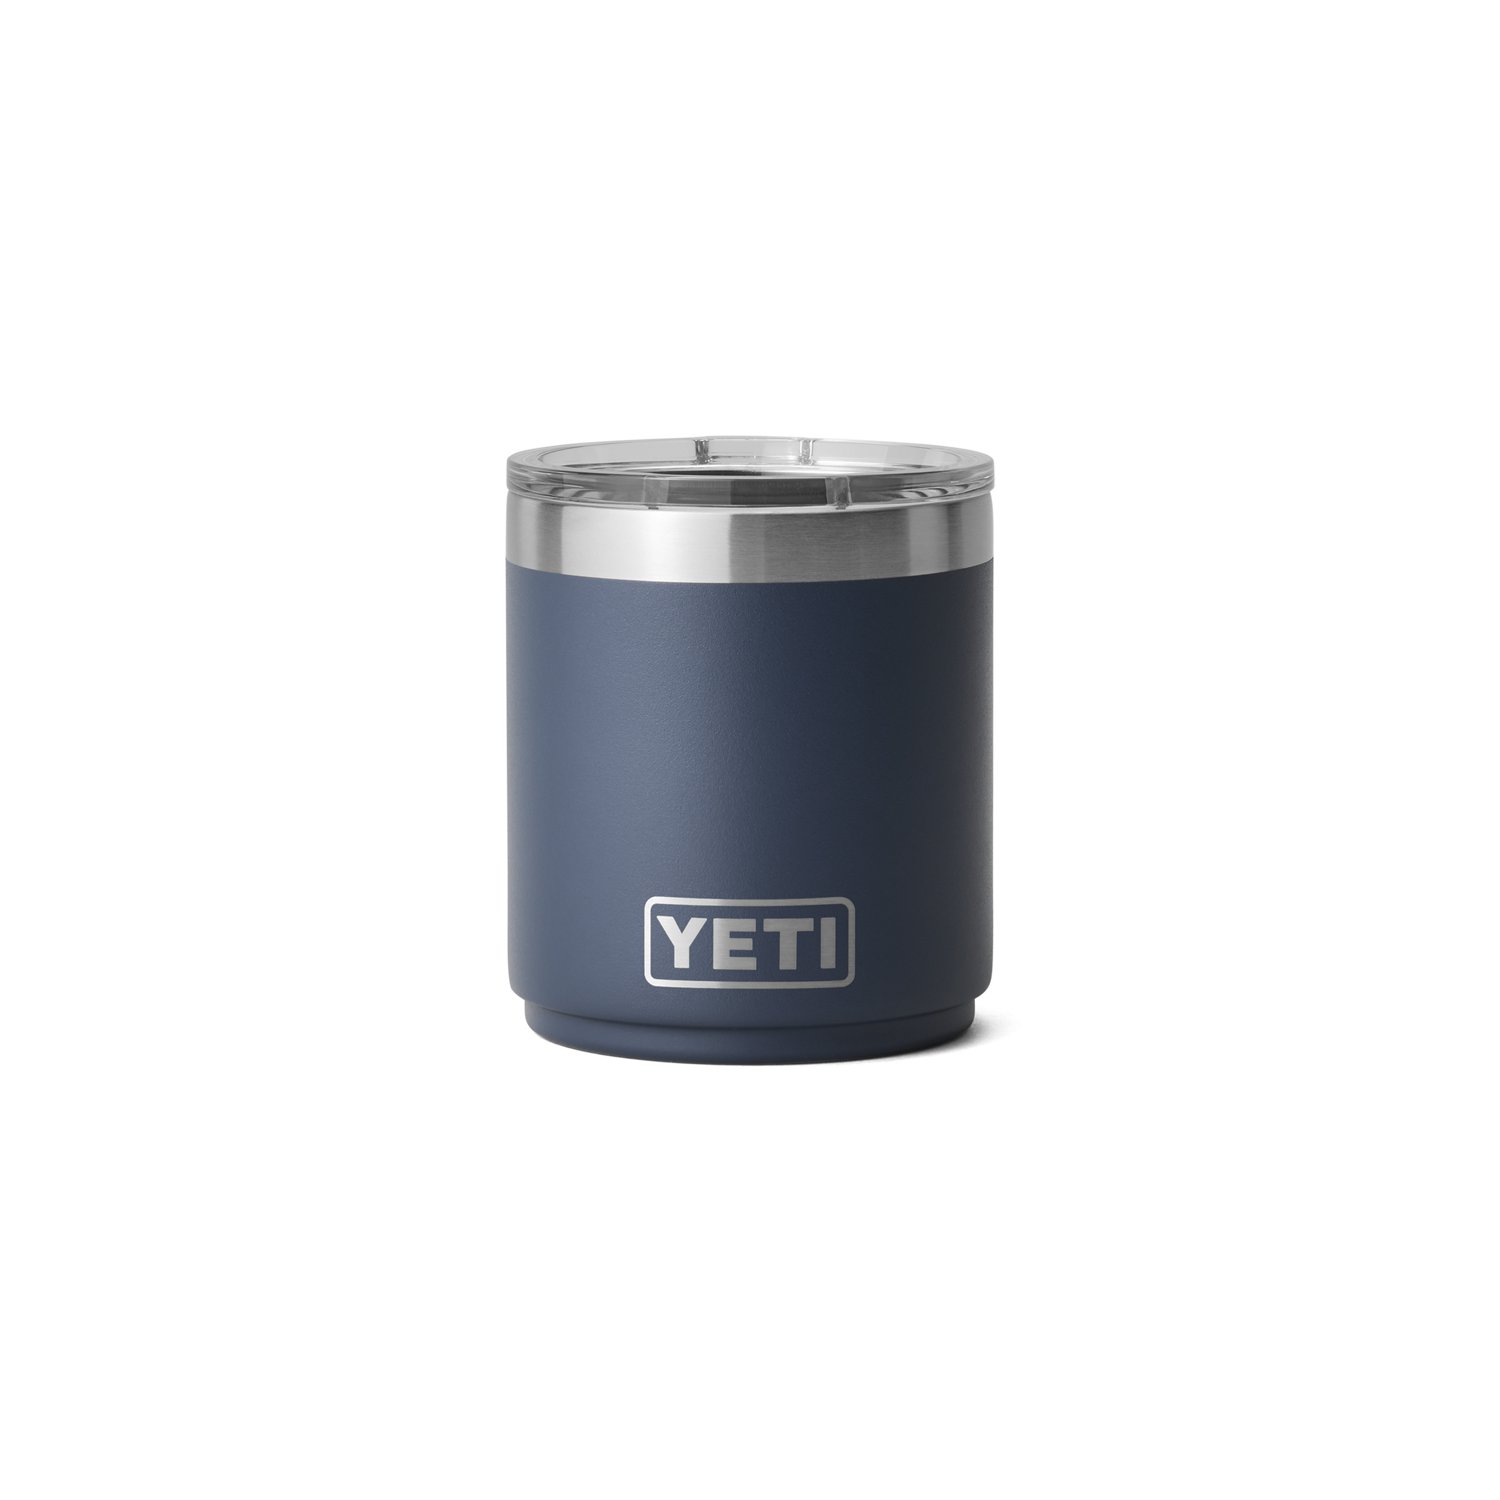 https://academy.scene7.com/is/image/academy//drinkware/yeti-rambler-10-oz-lowball-20-21071501960-blue/ecf3a96af63941118f03e2dbb2505d6c?$pdp-gallery-ng$